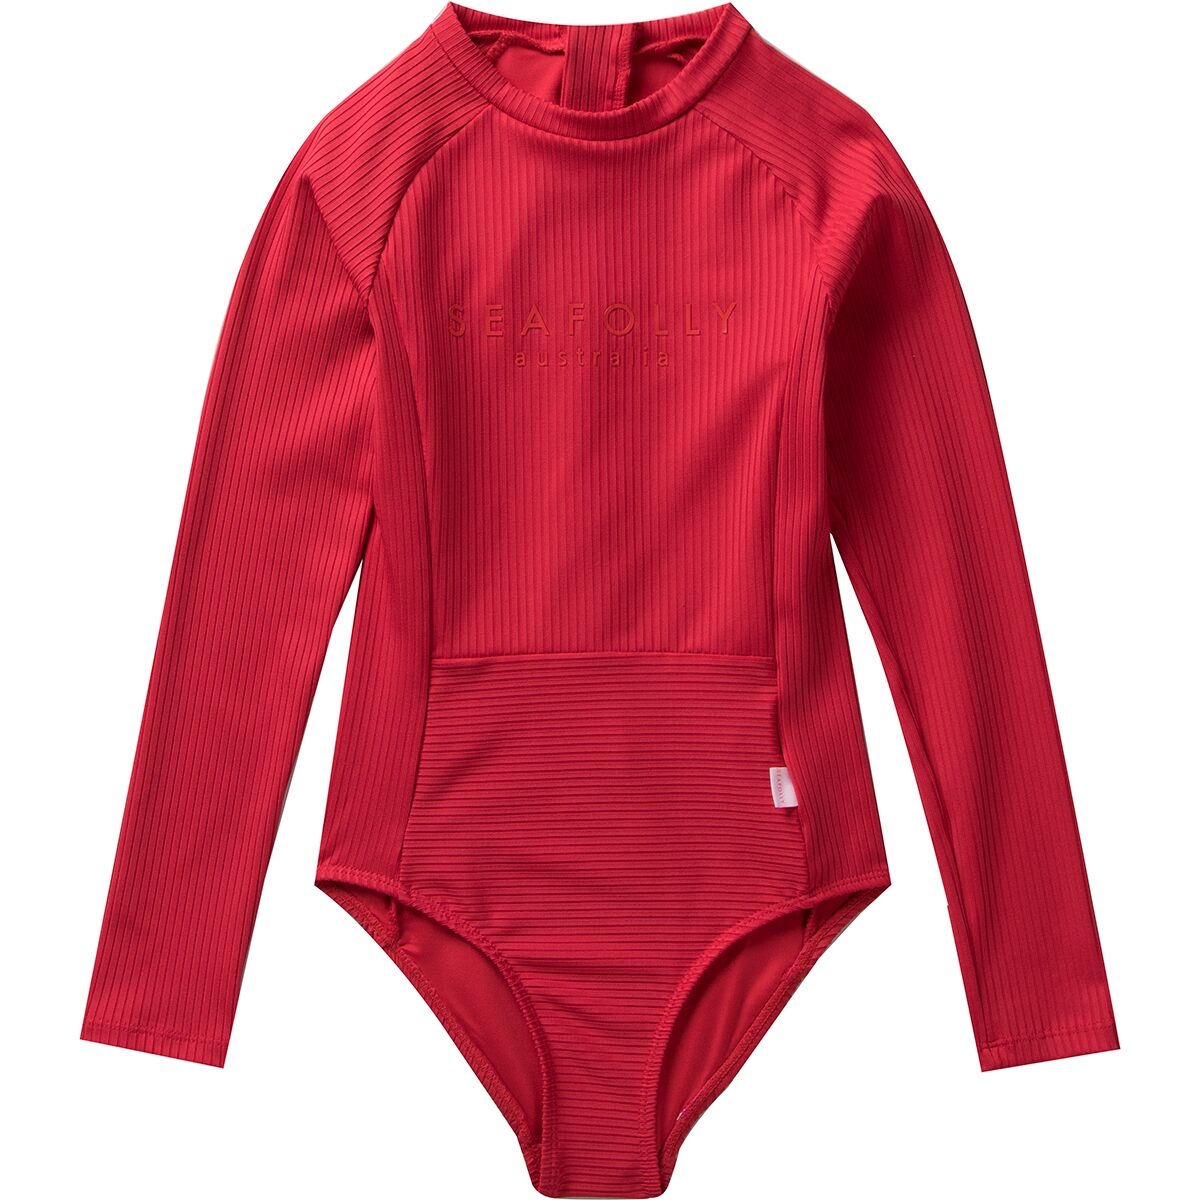 Seafolly Summer Essentials Panelled Paddlesuit - Girls'